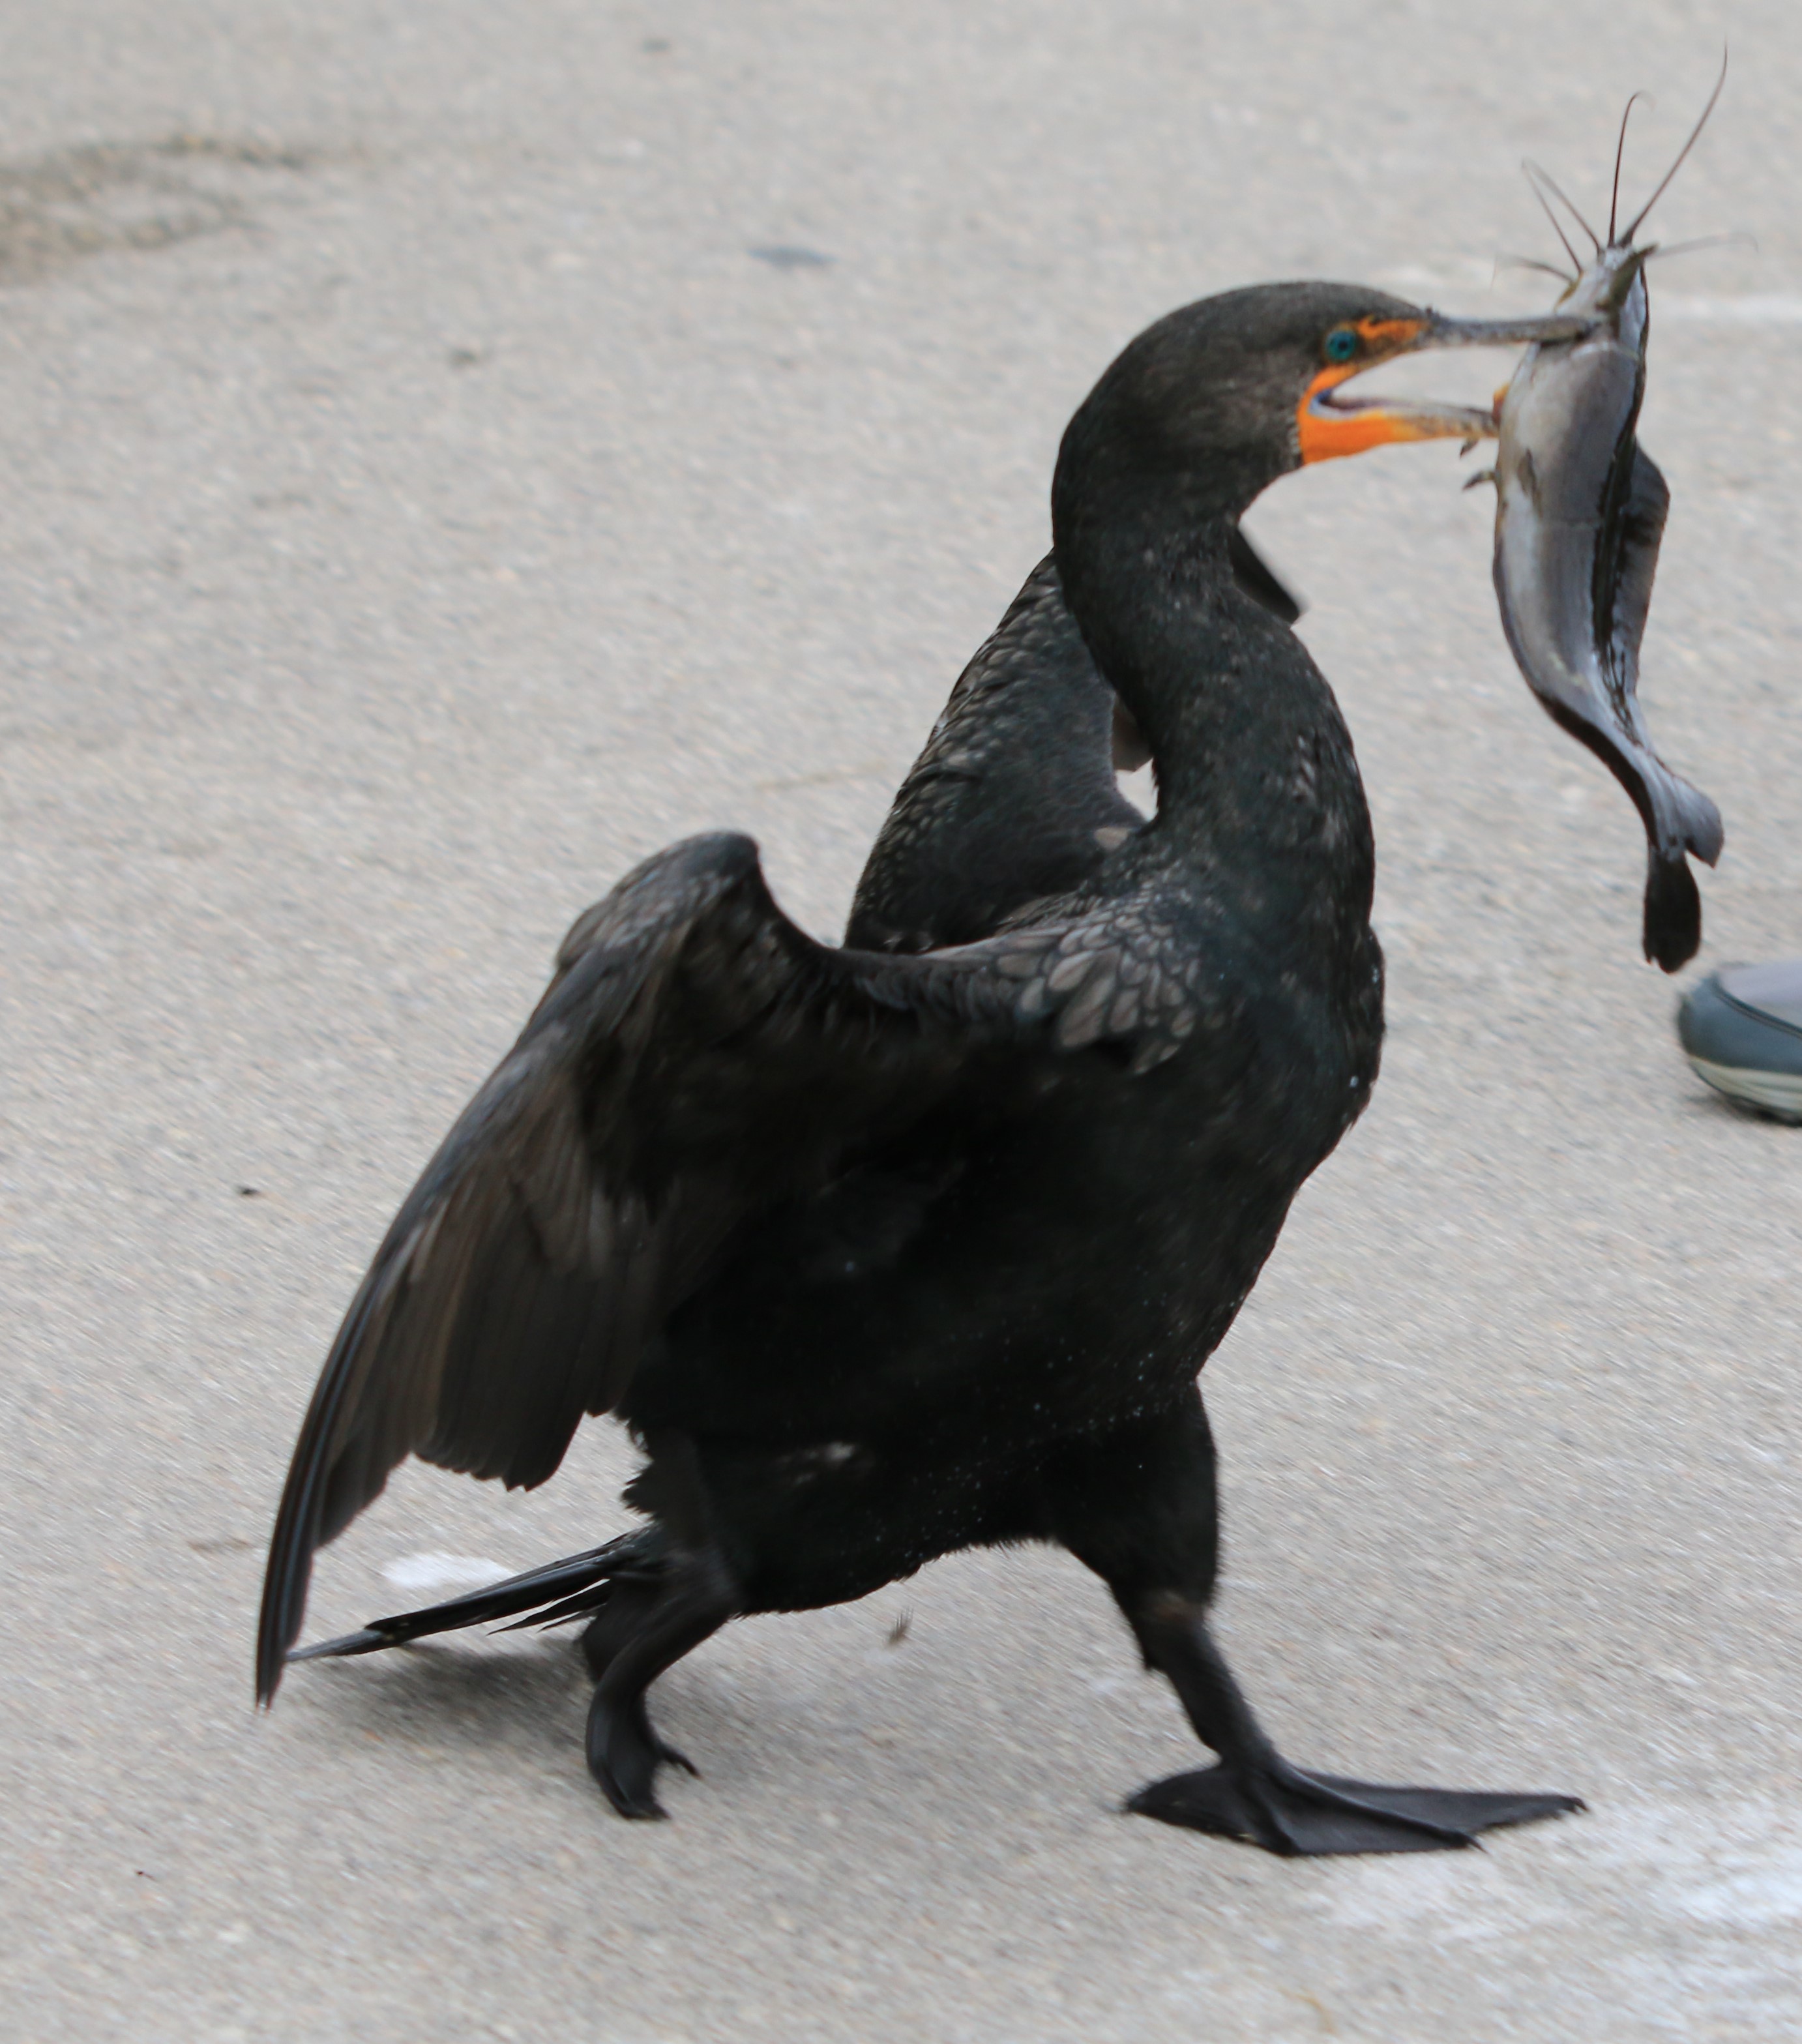 A cormorant with a fish